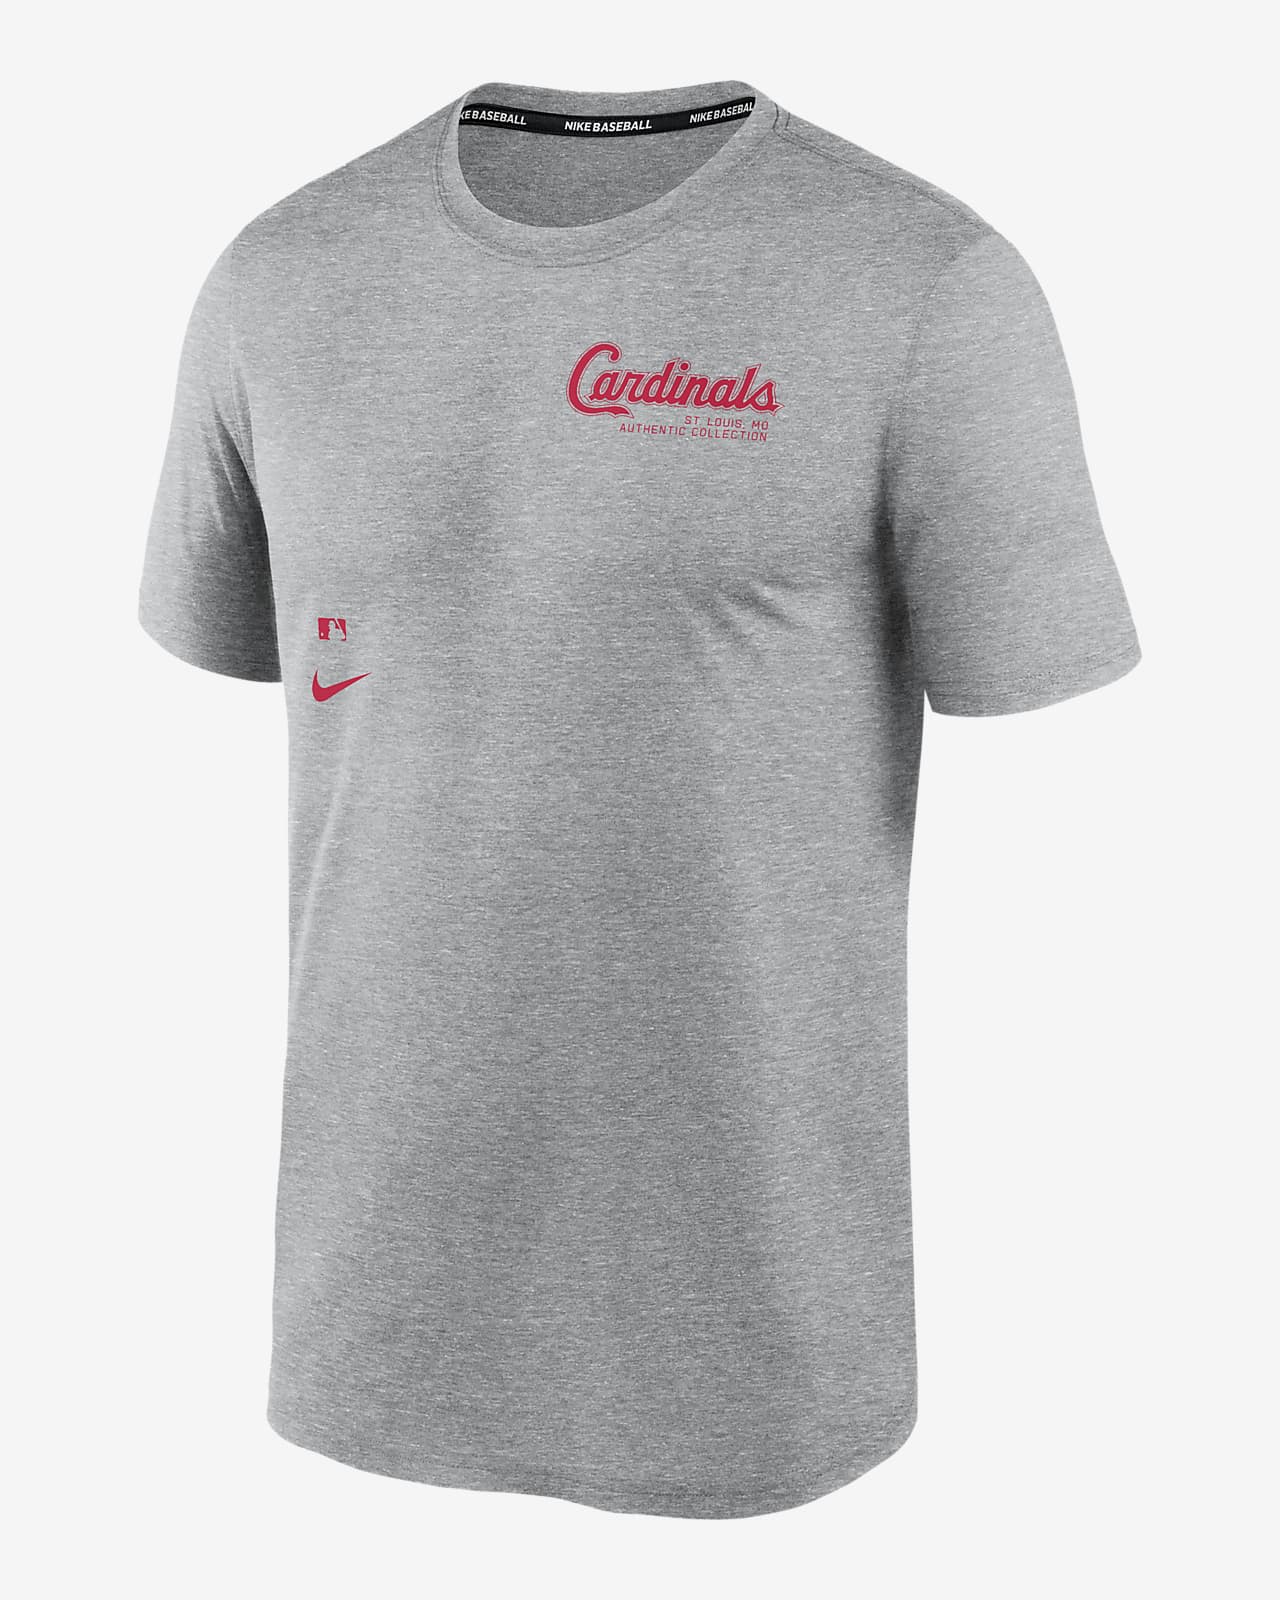 St. Louis Cardinals Authentic Collection Early Work Men’s Nike Dri-FIT MLB T-Shirt